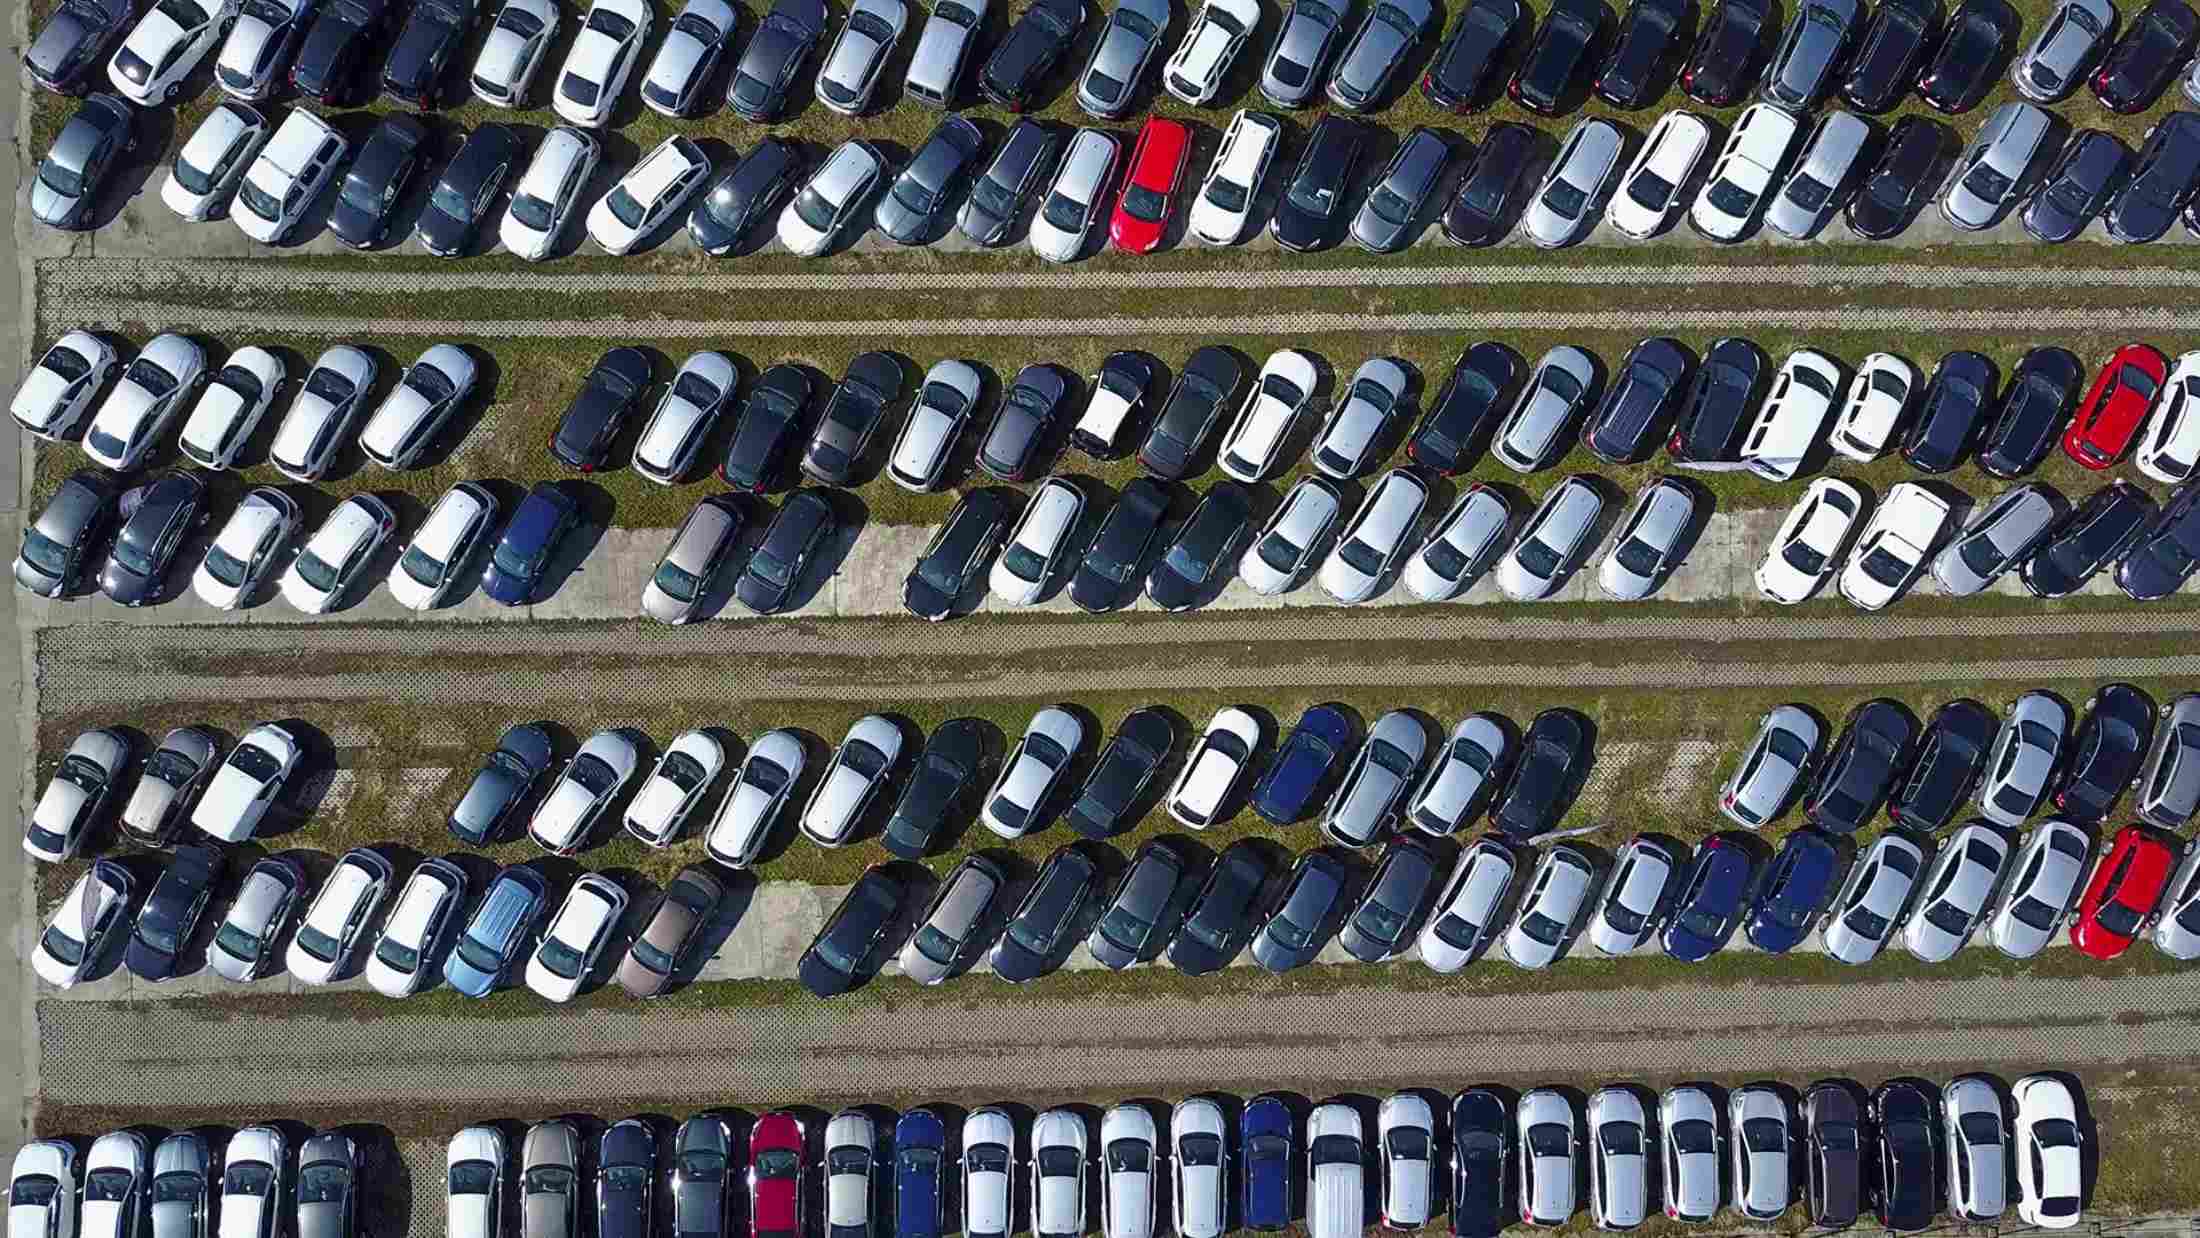 Used cars parked in rows